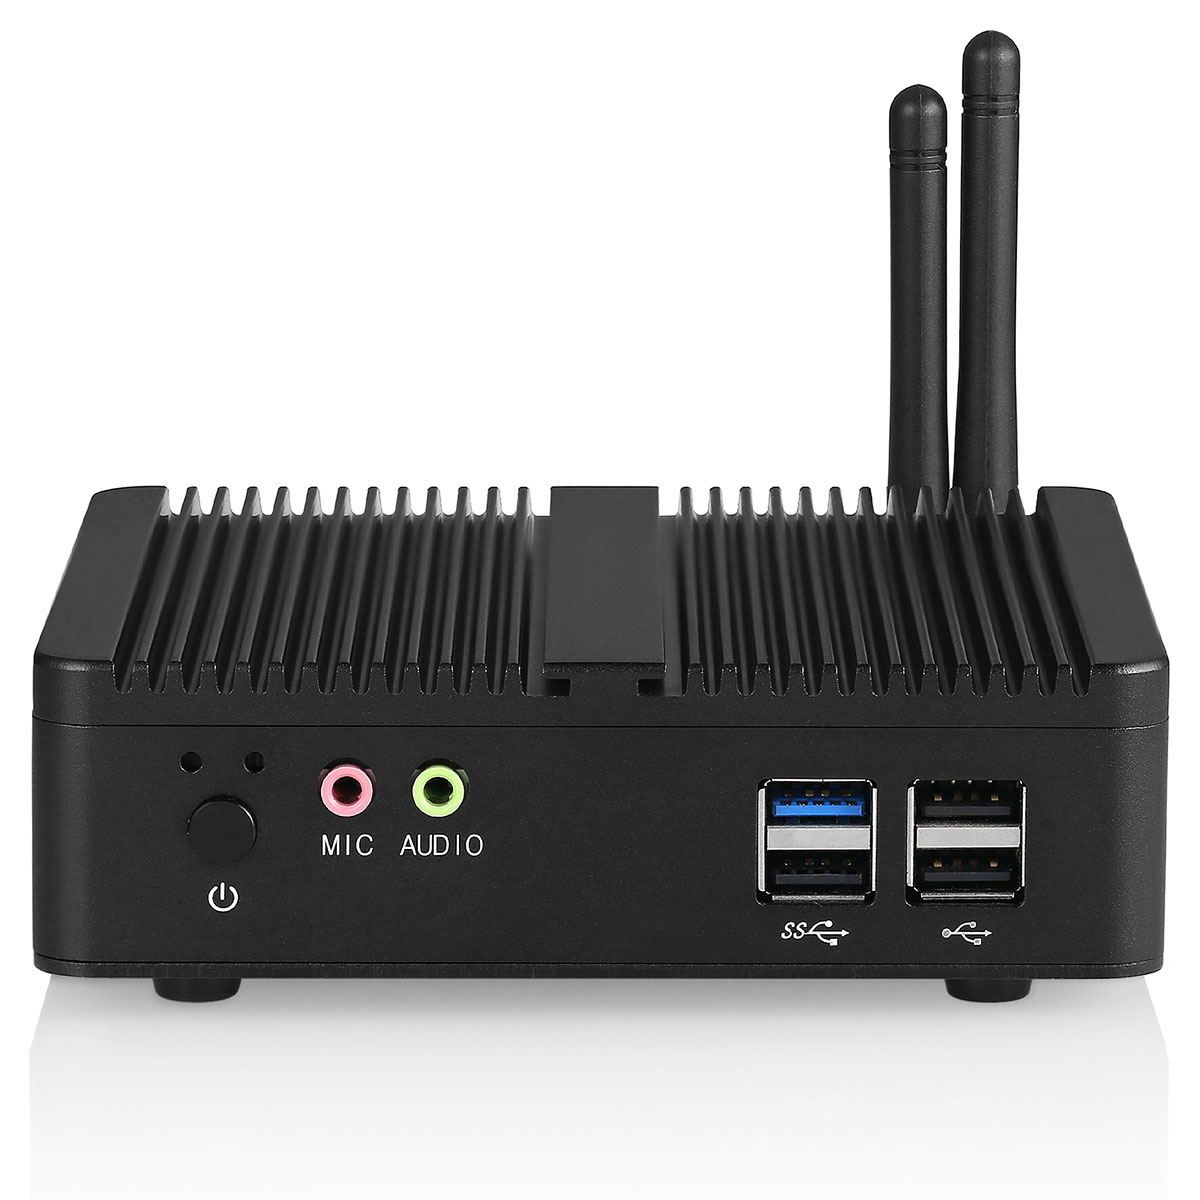 TOYOSO thin client mini PC industry for computer Duffy ho -stroke Intel N2840 main frequency 2.16GHz turbo frequency 2.58GHz USB3.0